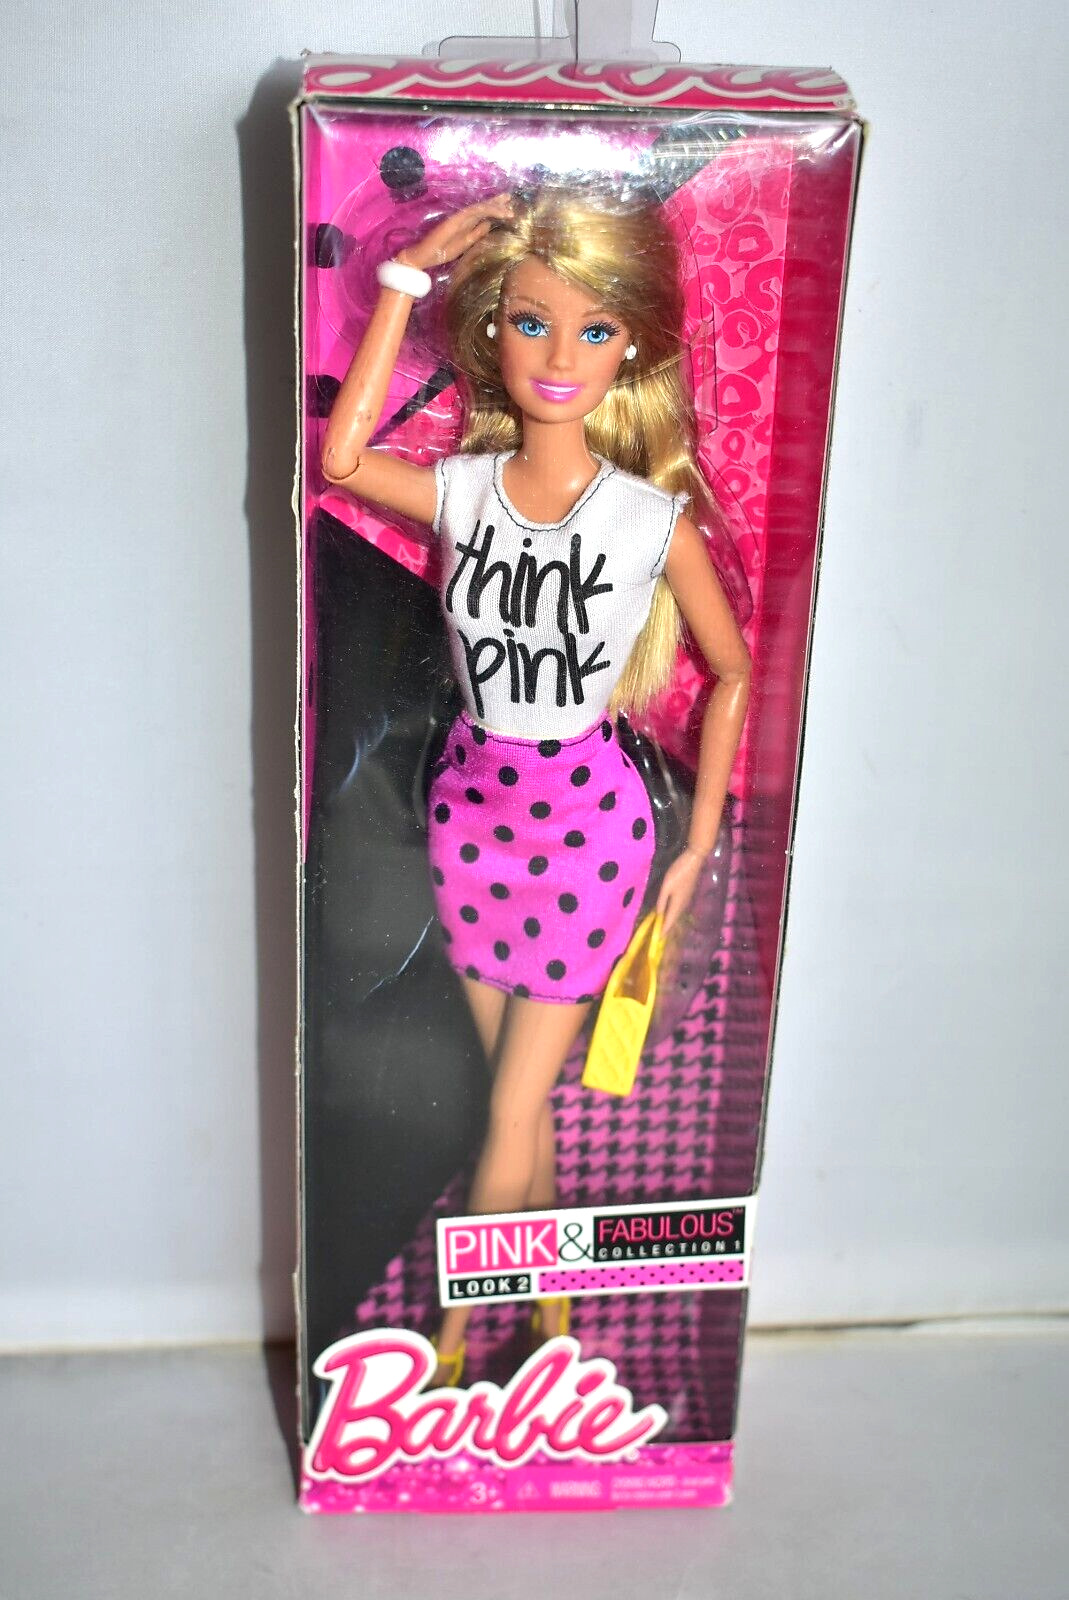 2014 Barbie Pink & Fabulous Collection 1 Look 2 THINK PINK Polka Dot Skirt